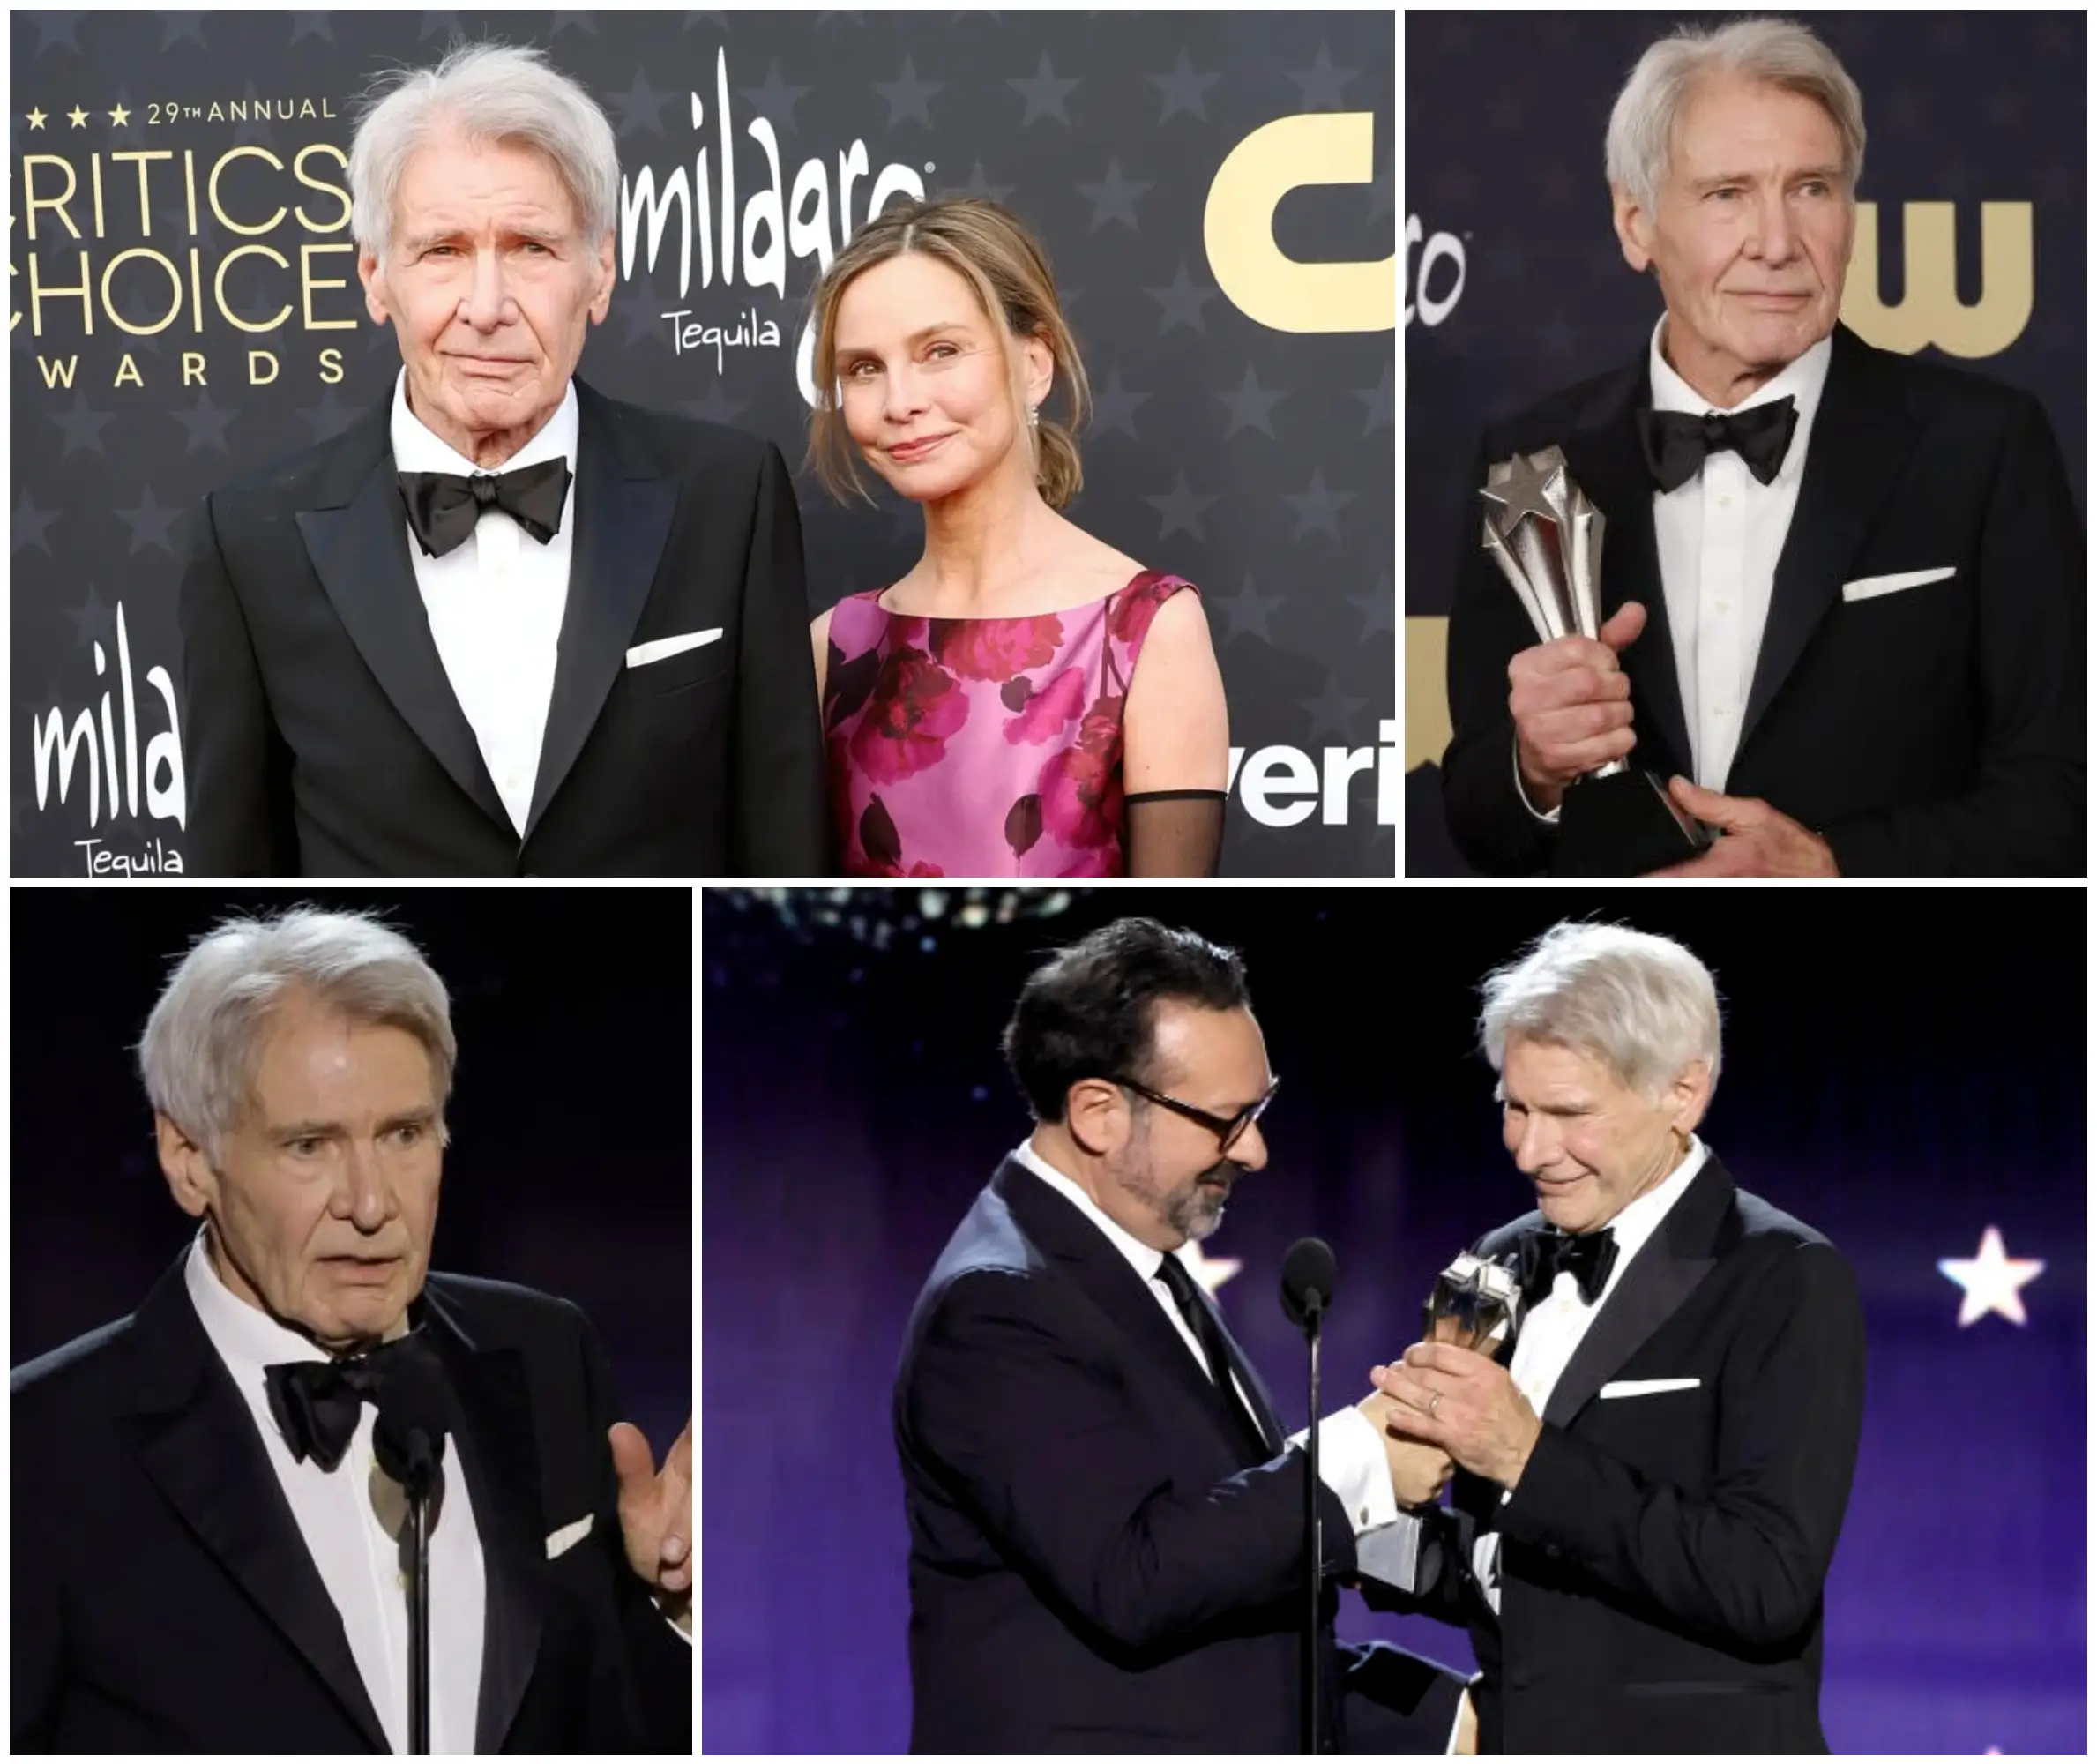 Harrison Ford: Celebrating a Career of Achievement at the Critics Choice Awards